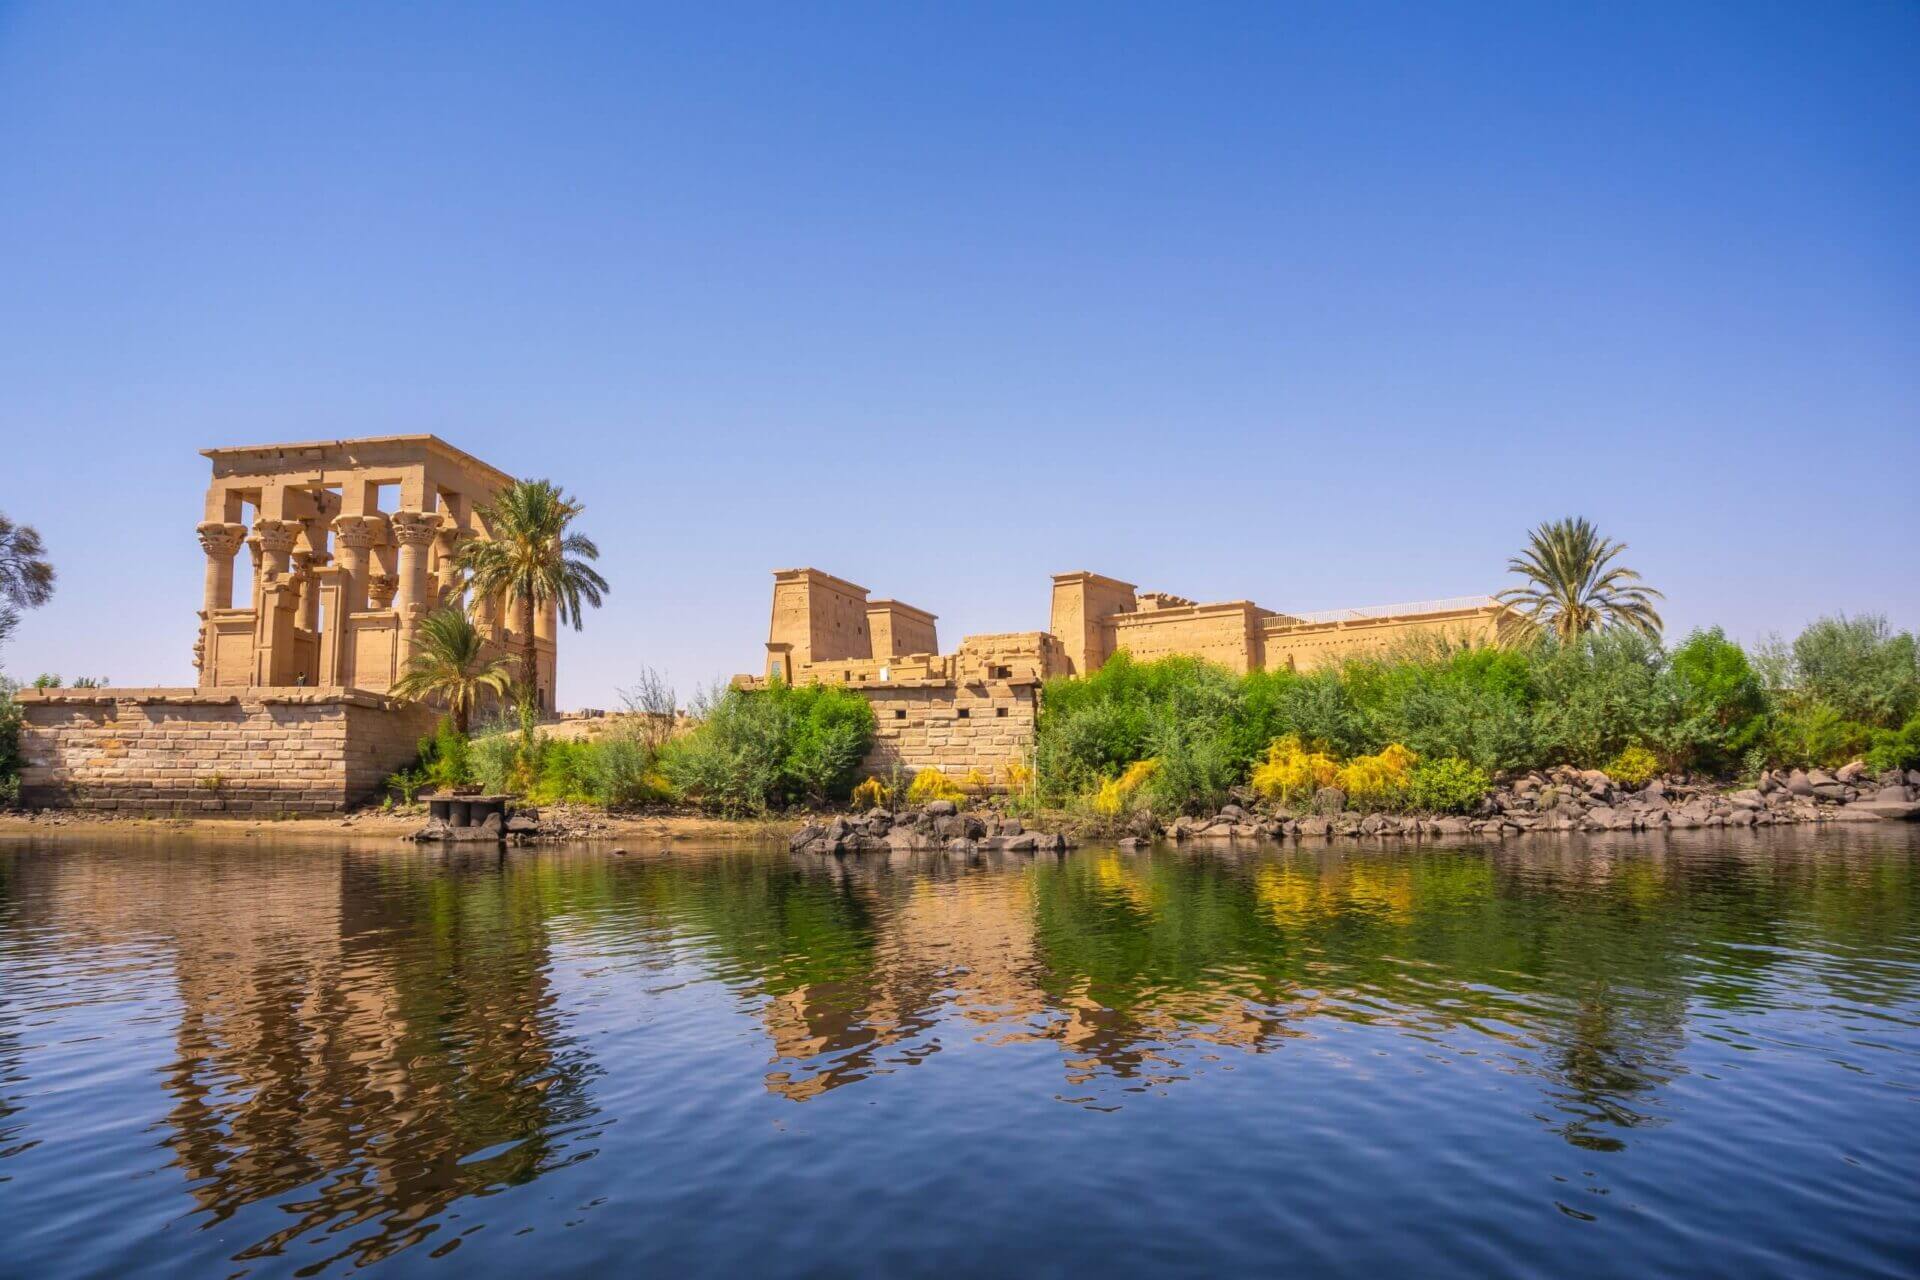 the-beautiful-temple-of-philae-and-the-greco-roman-buildings-seen-from-the-nile-river-a-temple-dedicated-to-isis-goddess-of-love-aswan-egyptian-stockpack-istock